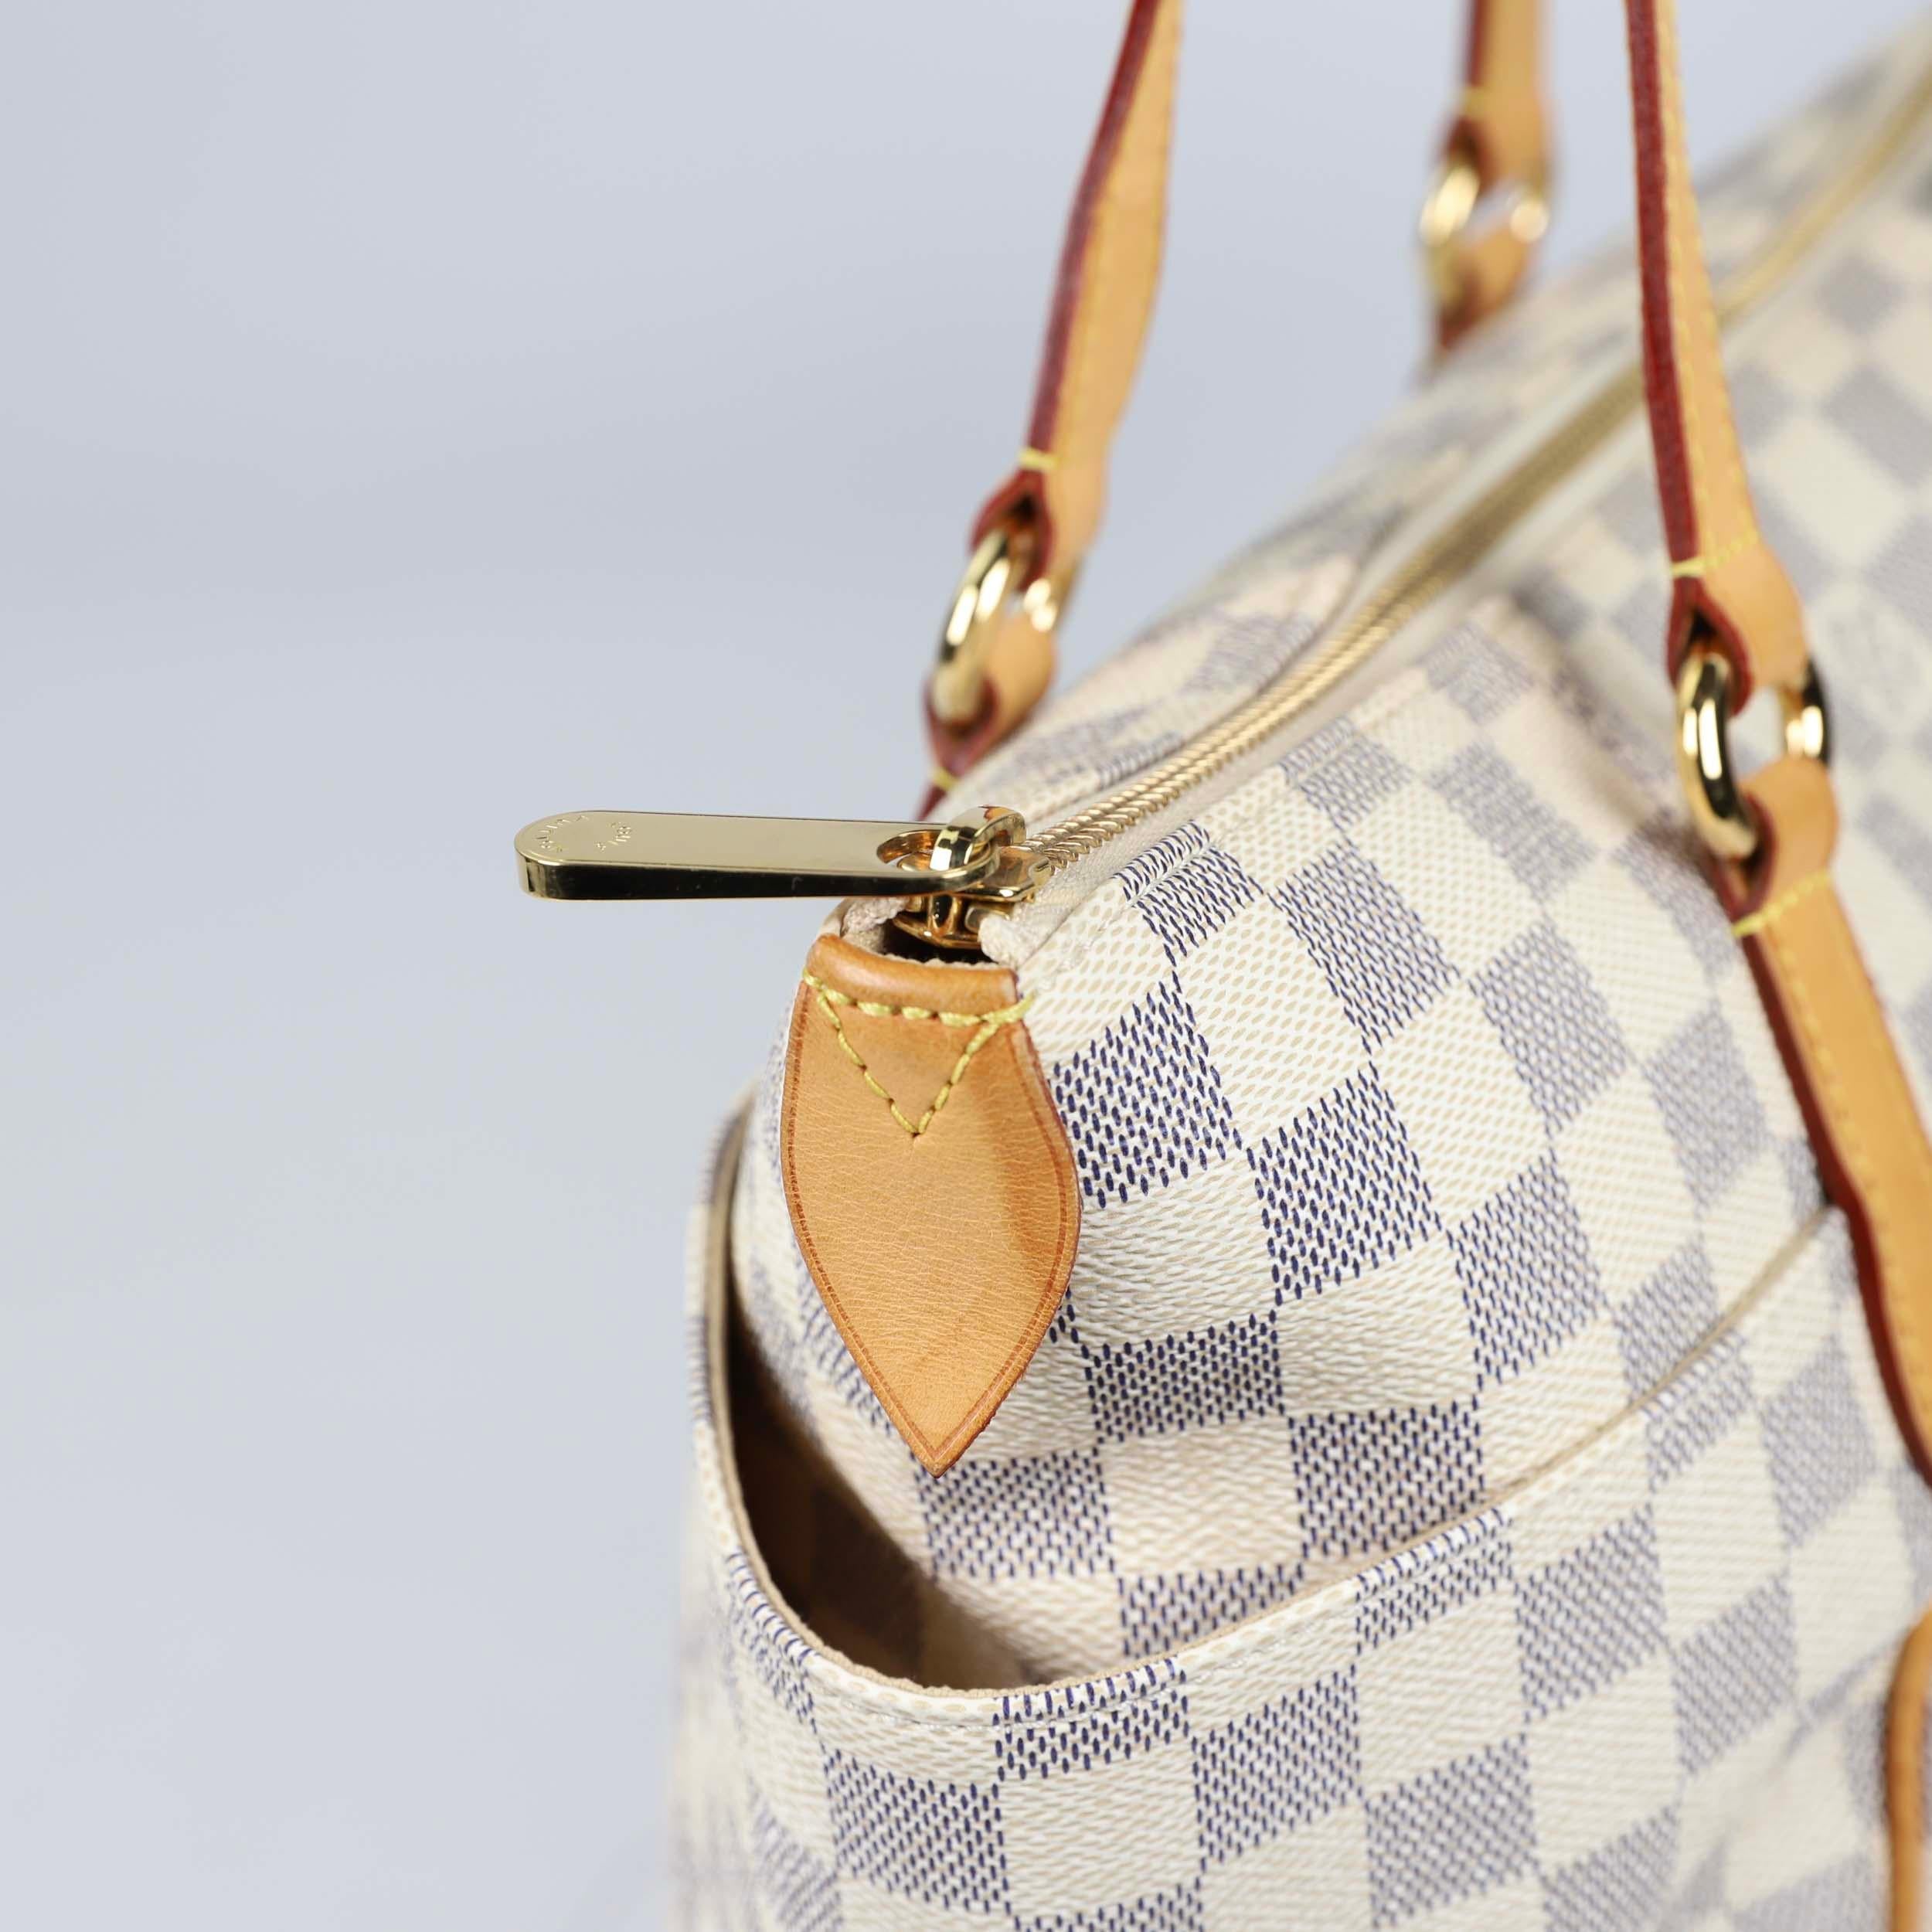 The Damier Azur Totally PM Bag is among the newest totes from Louis Vuitton and looks particularly striking in Damier Azur. It features a large yet lightweight design with an extra spacious interior and two large side pockets. This versatile tote is